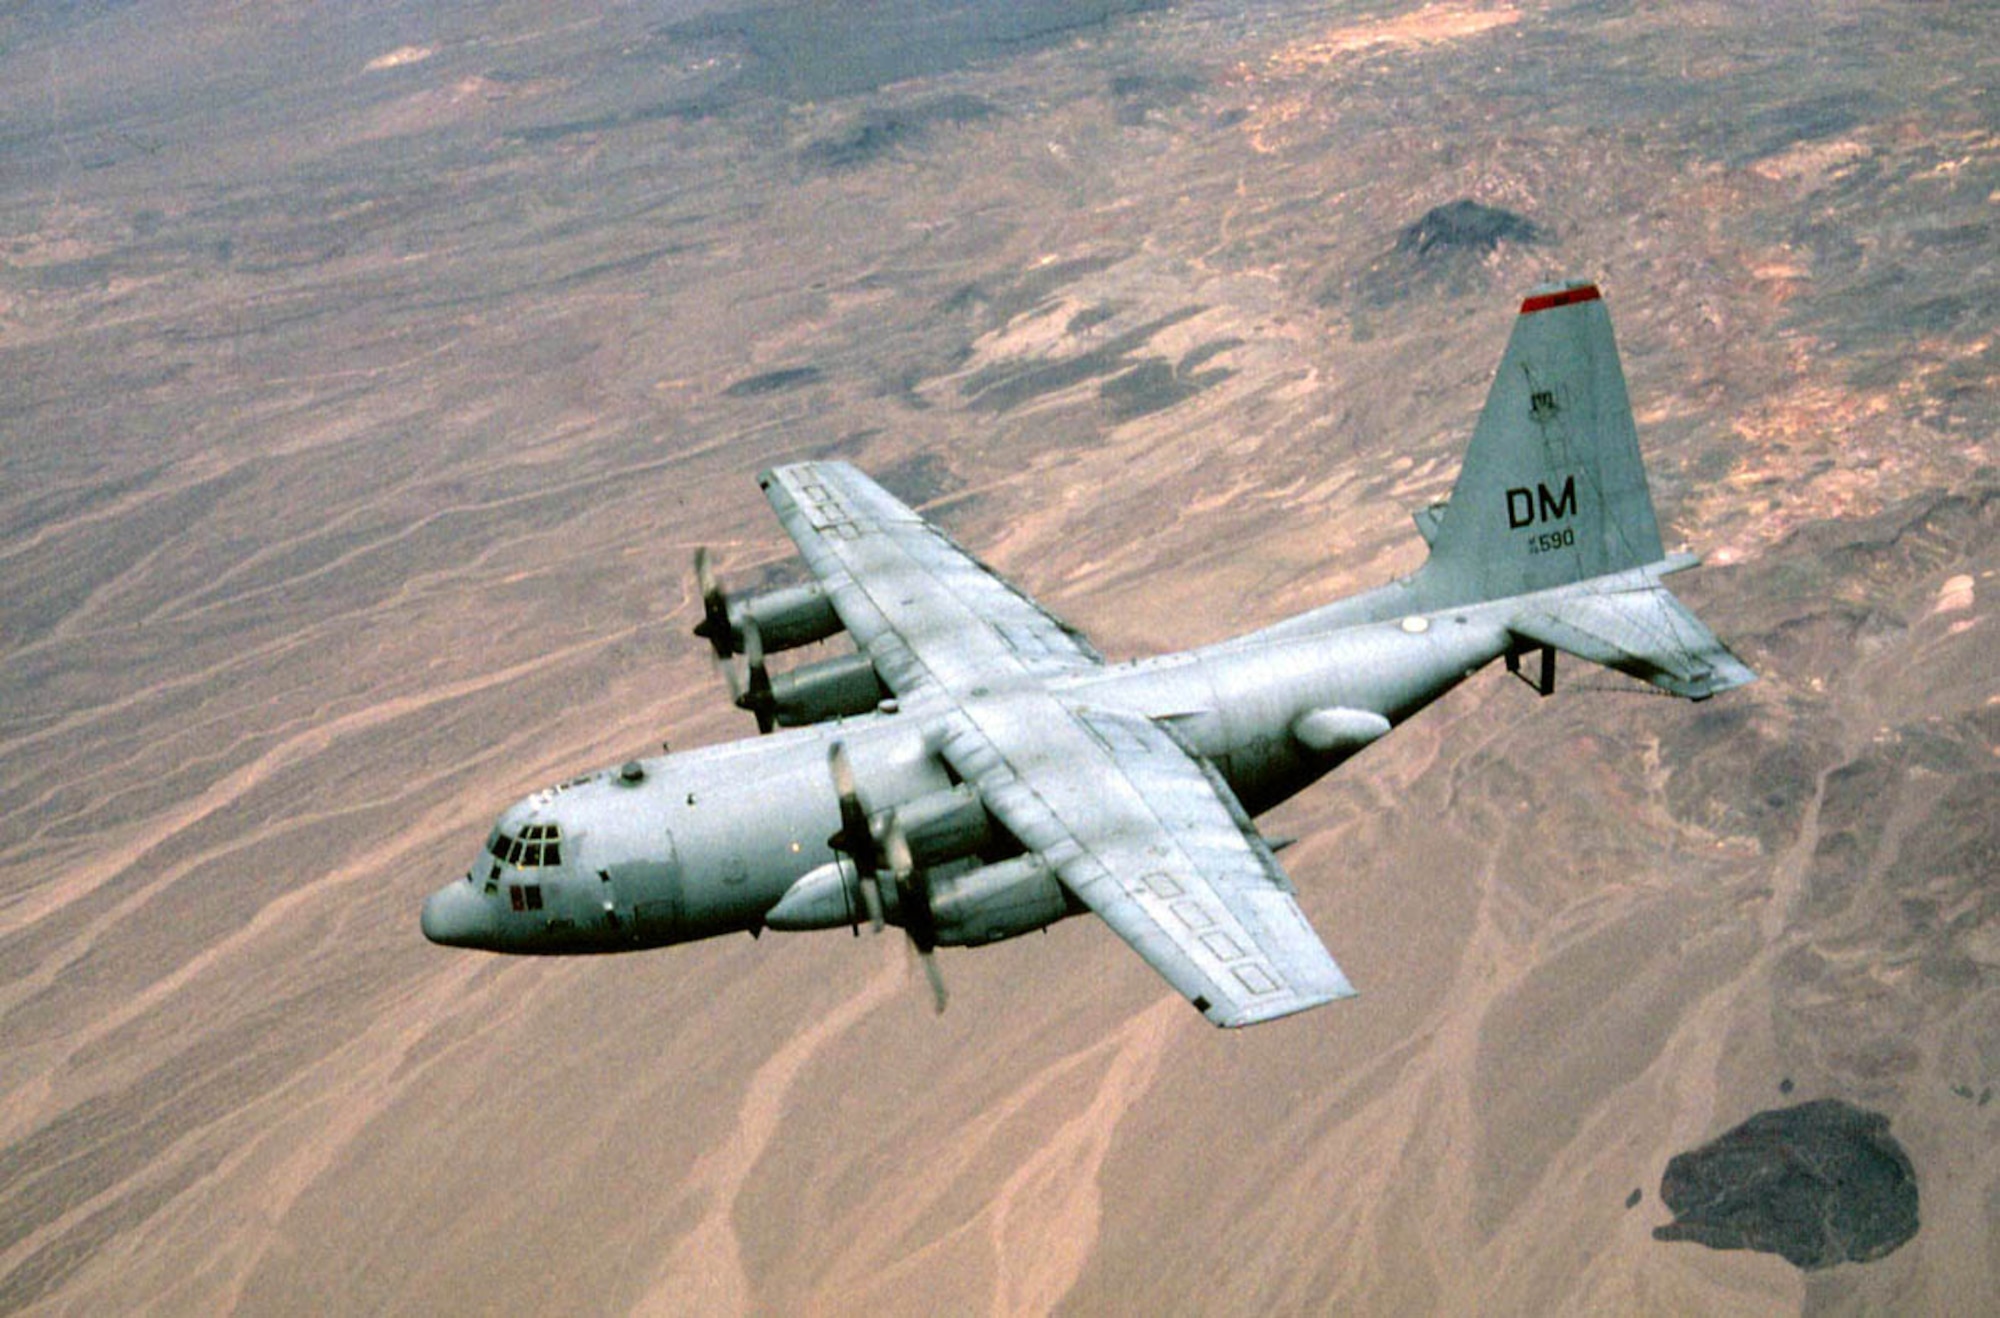 FILE PHOTO -- Compass Call is the designation for a modified version of Lockheed corporation's EC-130H Hercules aircraft configured to perform tactical command, control and communications countermeasures. Specifically, the modified aircraft uses noise jamming to prevent communication or degrade the transfer of information essential to command and control of weapon systems and other resources. It primarily supports tactical air operations but also can provide jamming support to ground force operations. Modifications to the aircraft include an electronic countermeasures system, air refueling capability and associated navigation and communications systems. (U.S. Air Force Photo) 